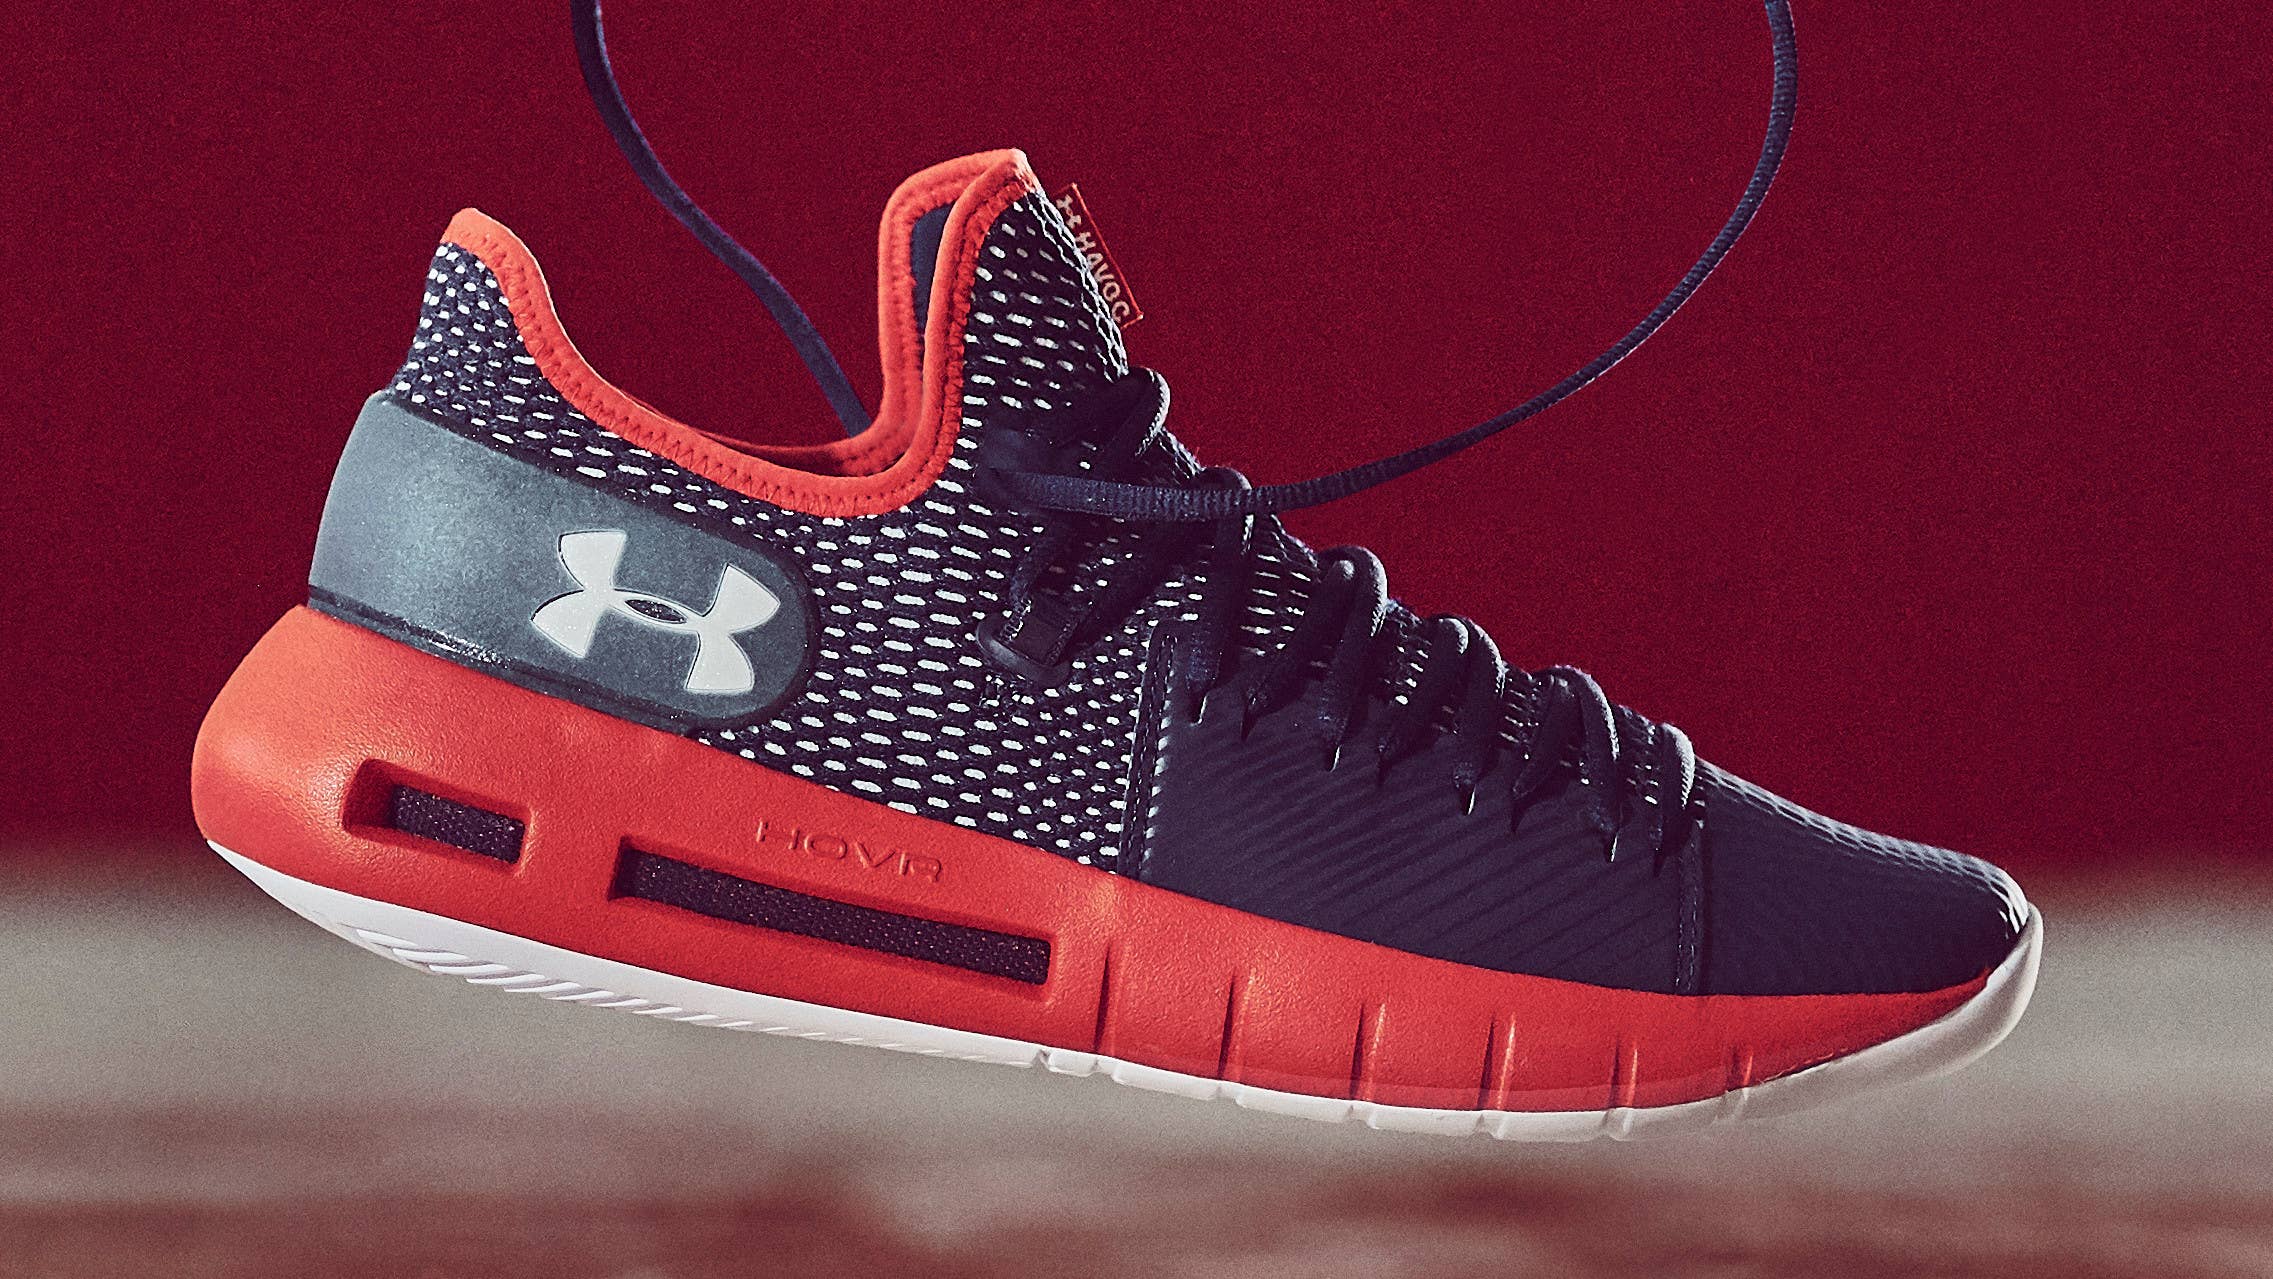 First Look: Under Armour's 2018 HOVR Running Shoes